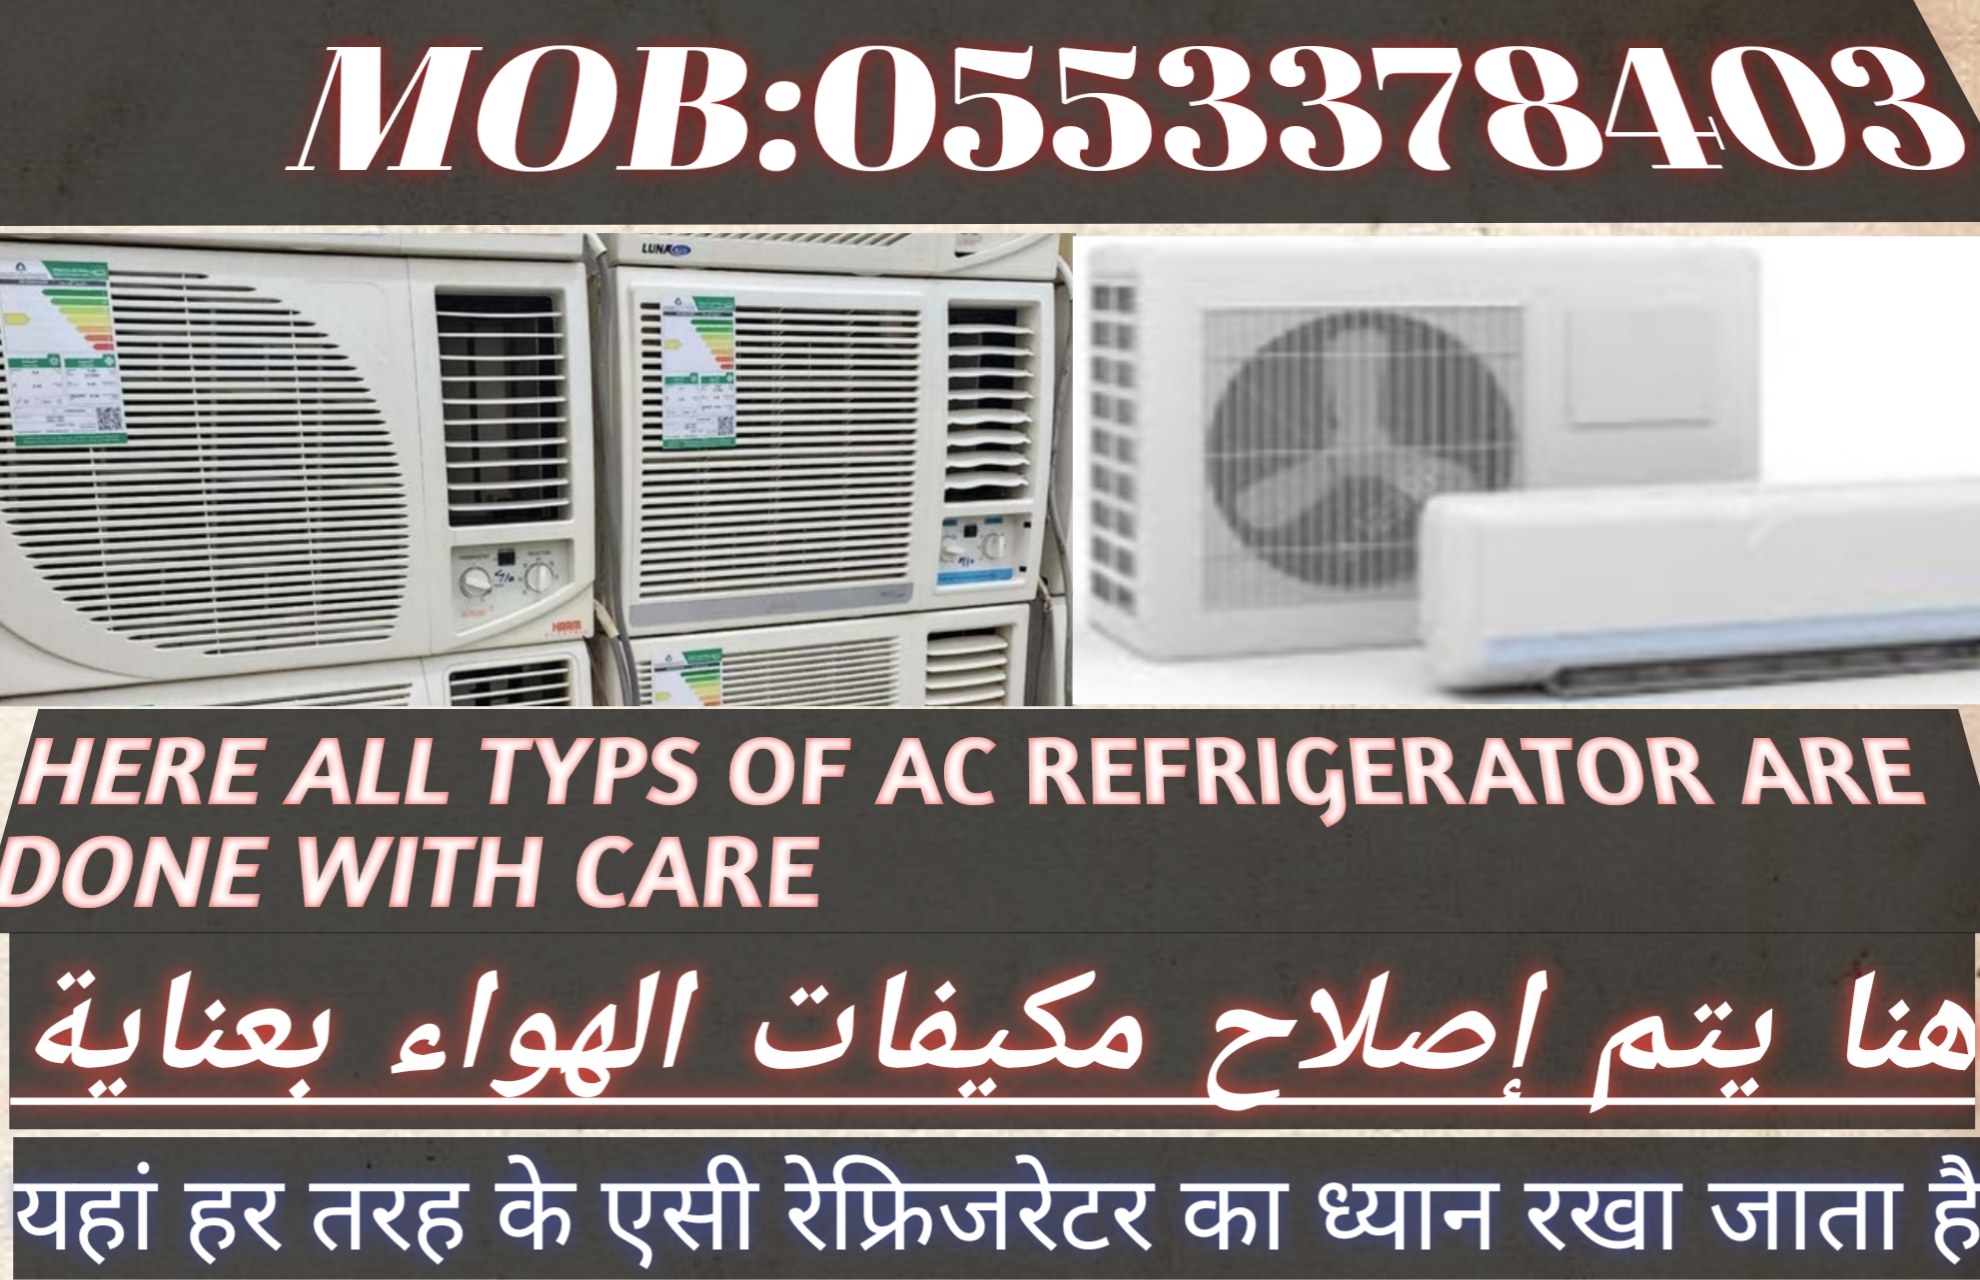 Here all types of AC refrigerators are done w